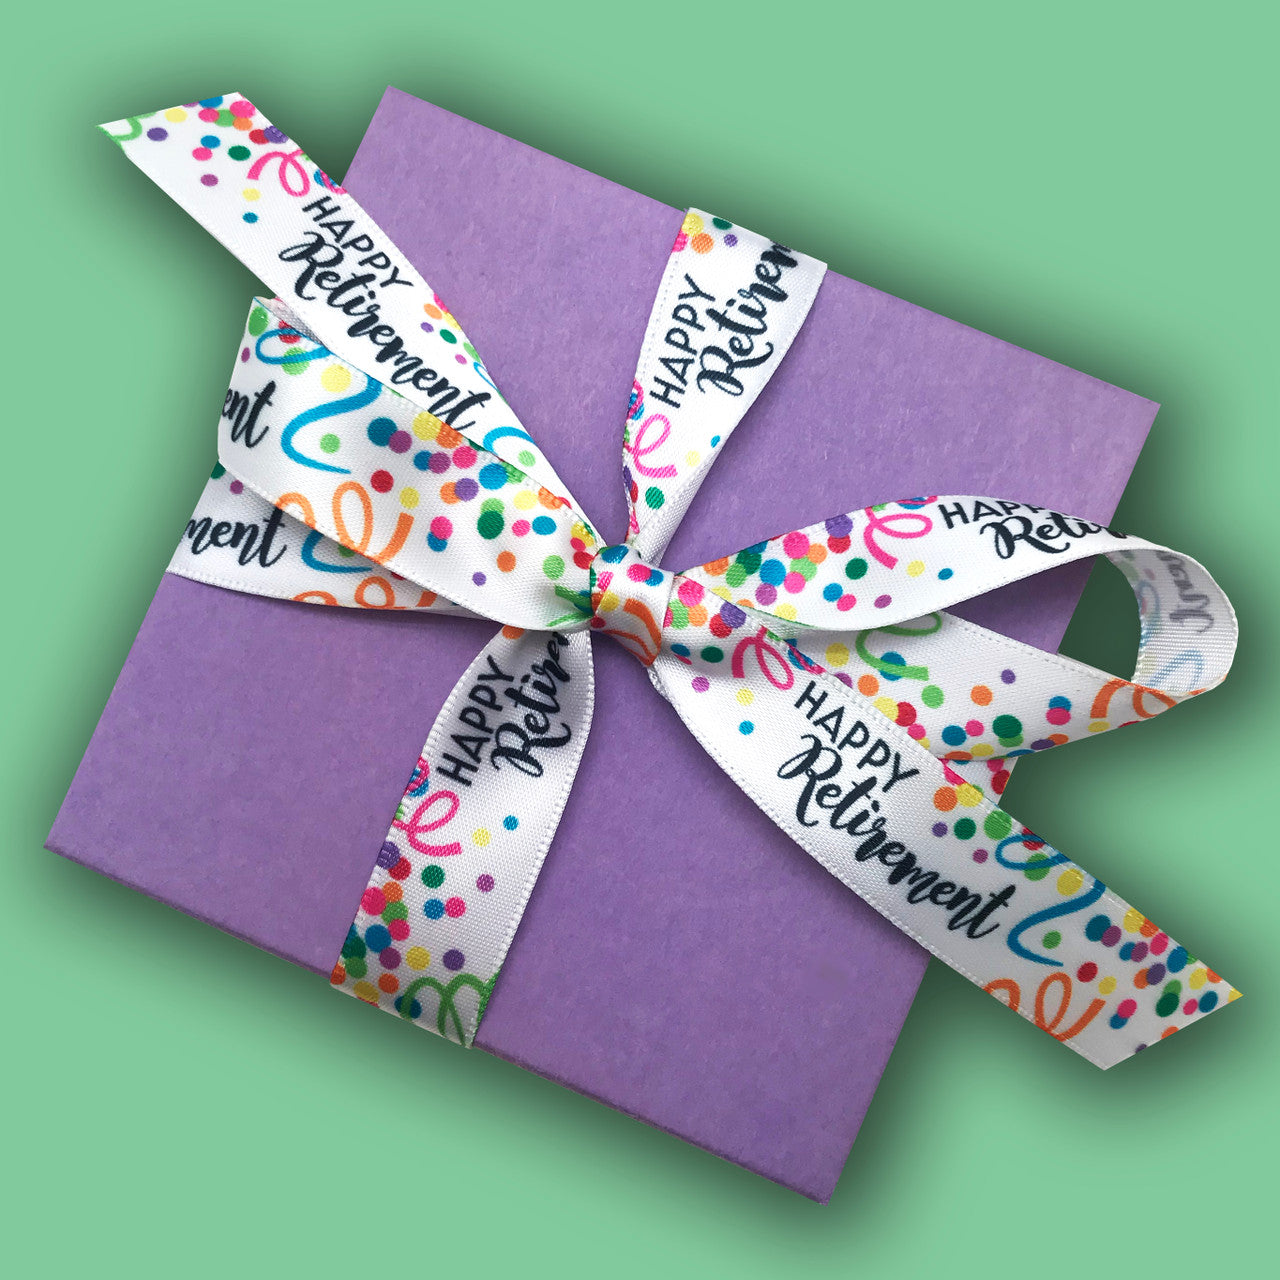 Tie a pretty little gift with this fun retirement ribbon to make a memorable package!